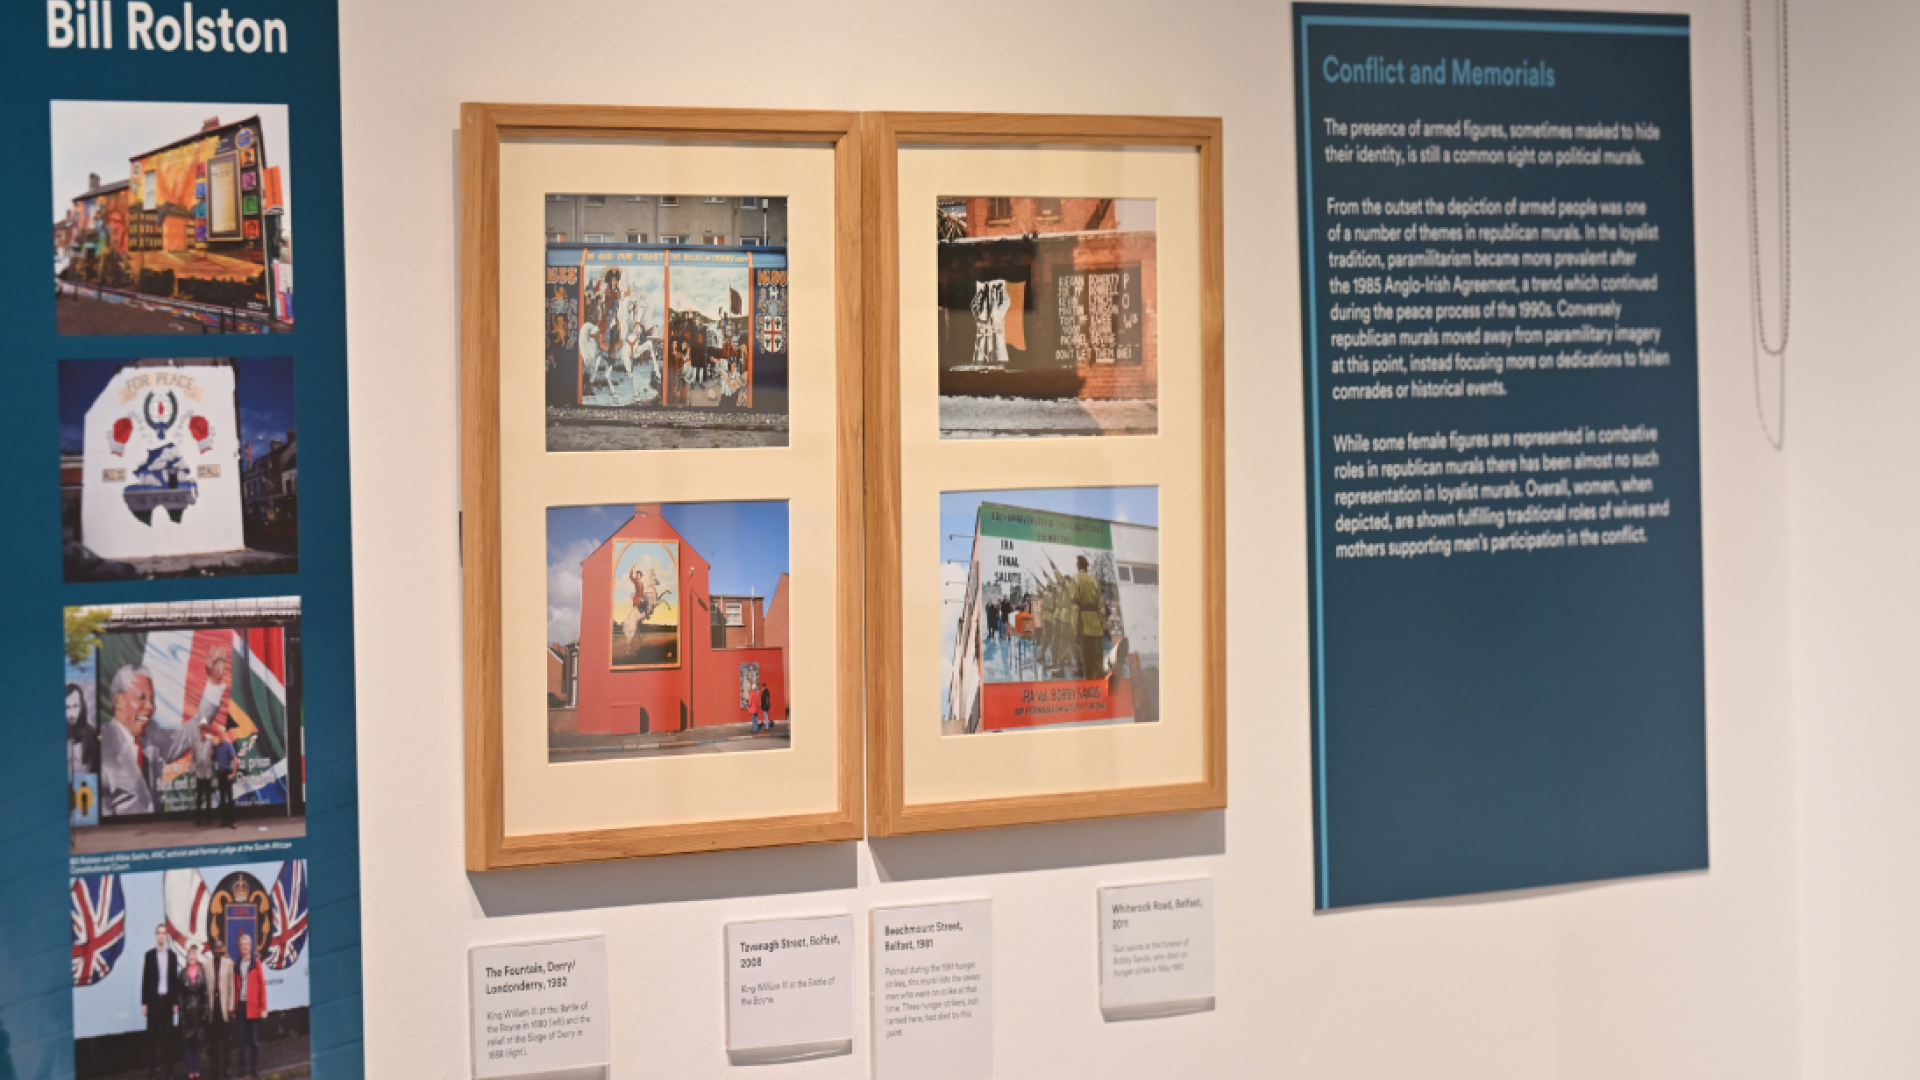 Four photographs of murals in wooden frames hung on a white wall inside a room in the Ulster Museum. Two turquoise coloured text panels are positioned on either side of the frames.